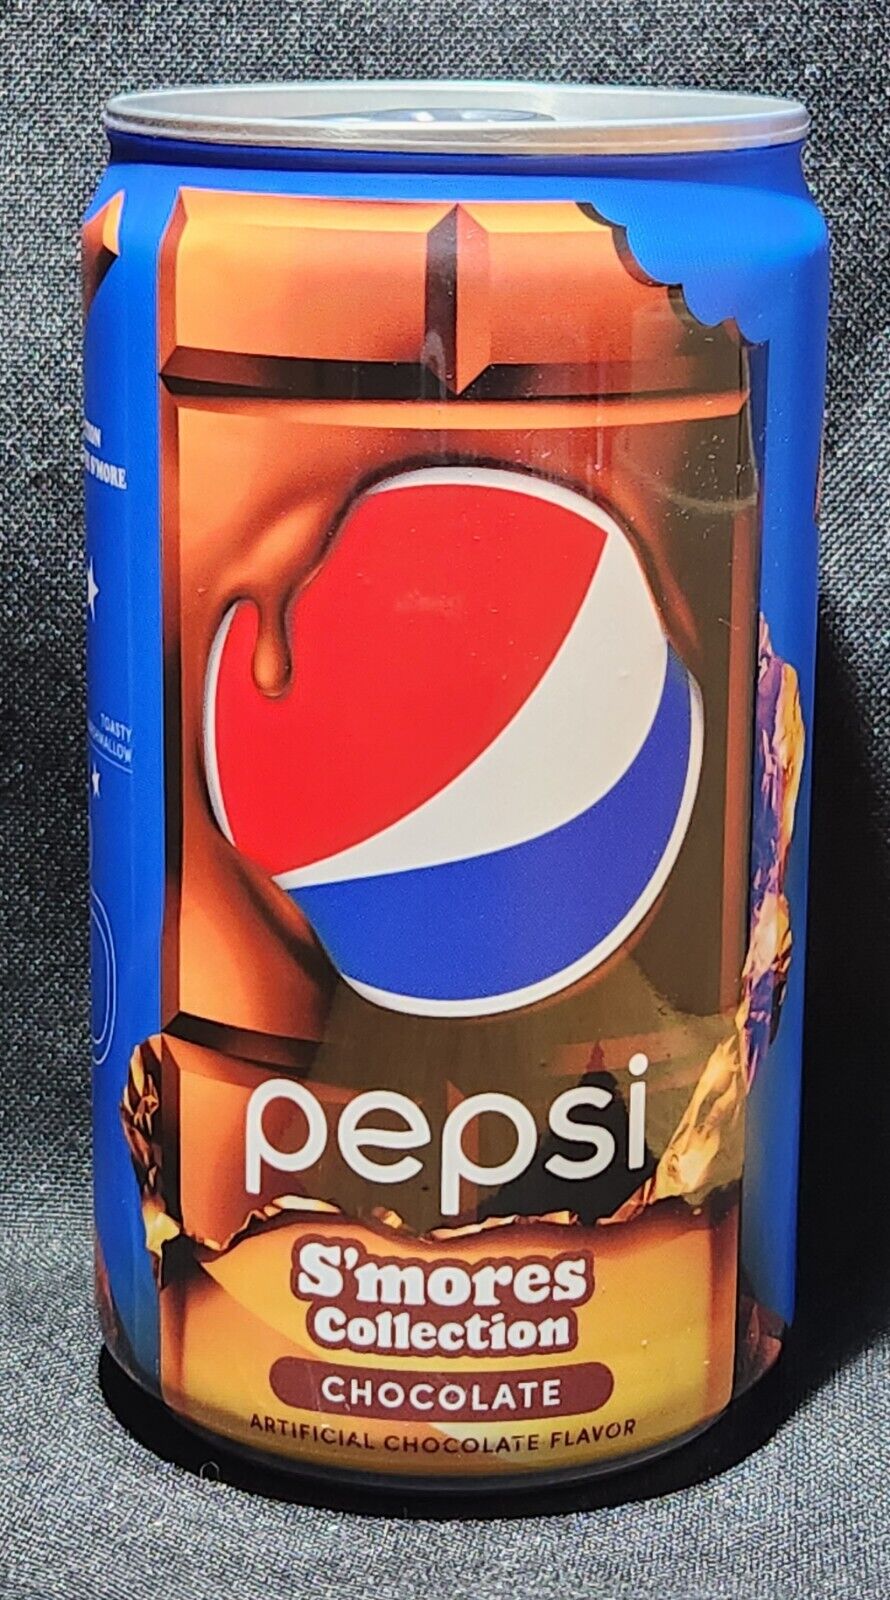 Pepsi Chocolate Flavored Soda Cola - Limited Edition S'mores - 1 Can